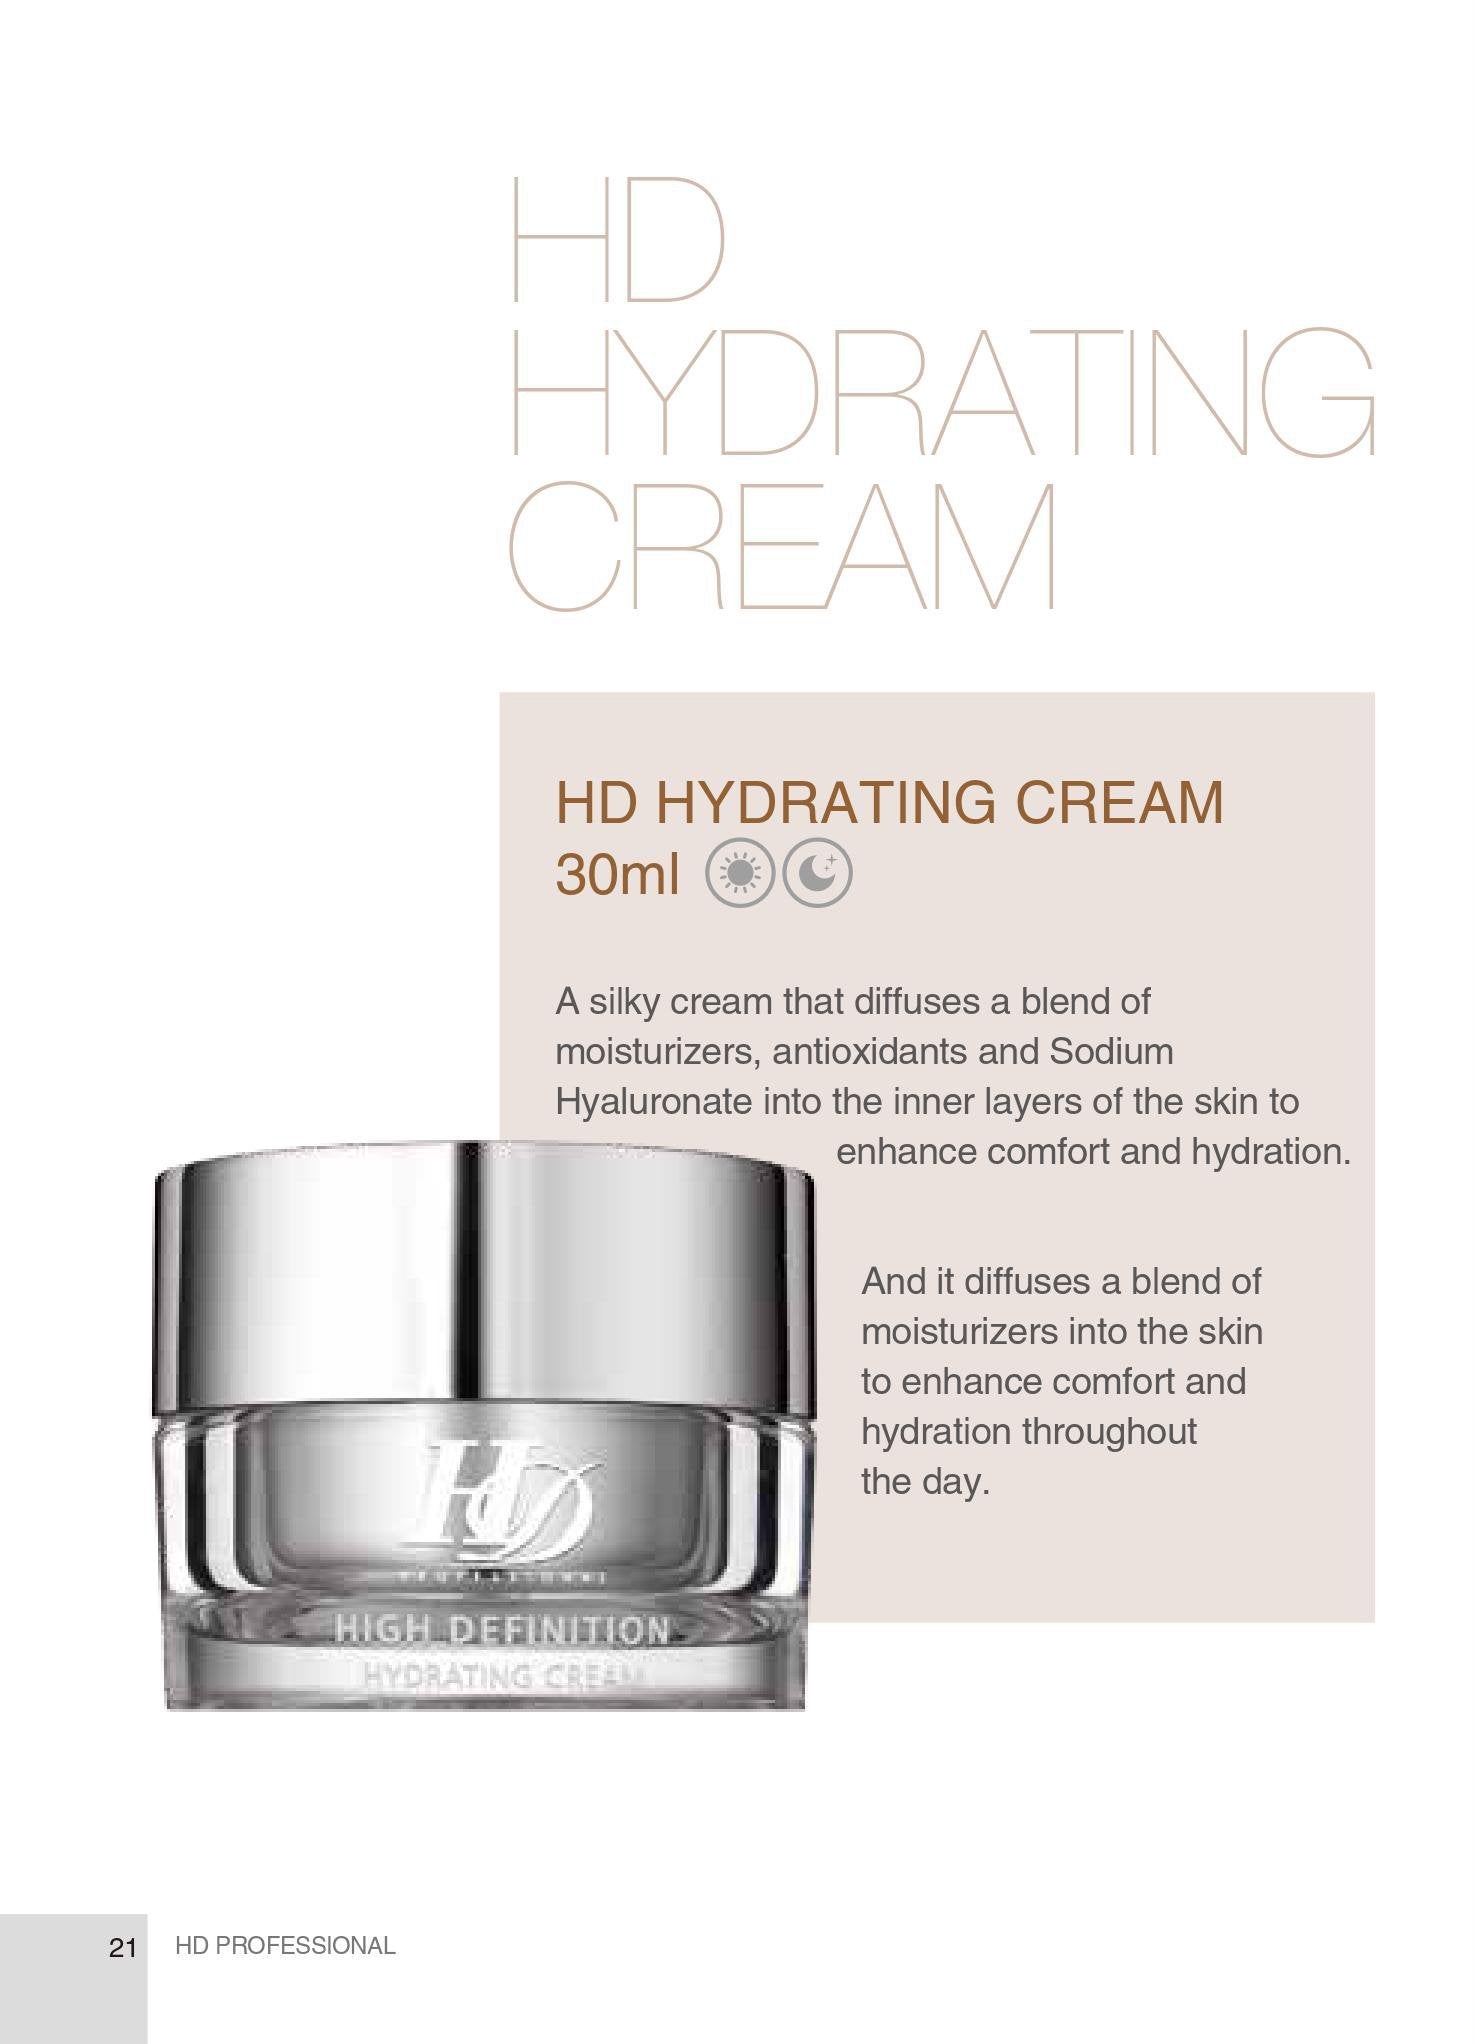 Fly Up HD Skincare Hydrating Cream - fly up beauty HD makeup professional make up kattong 